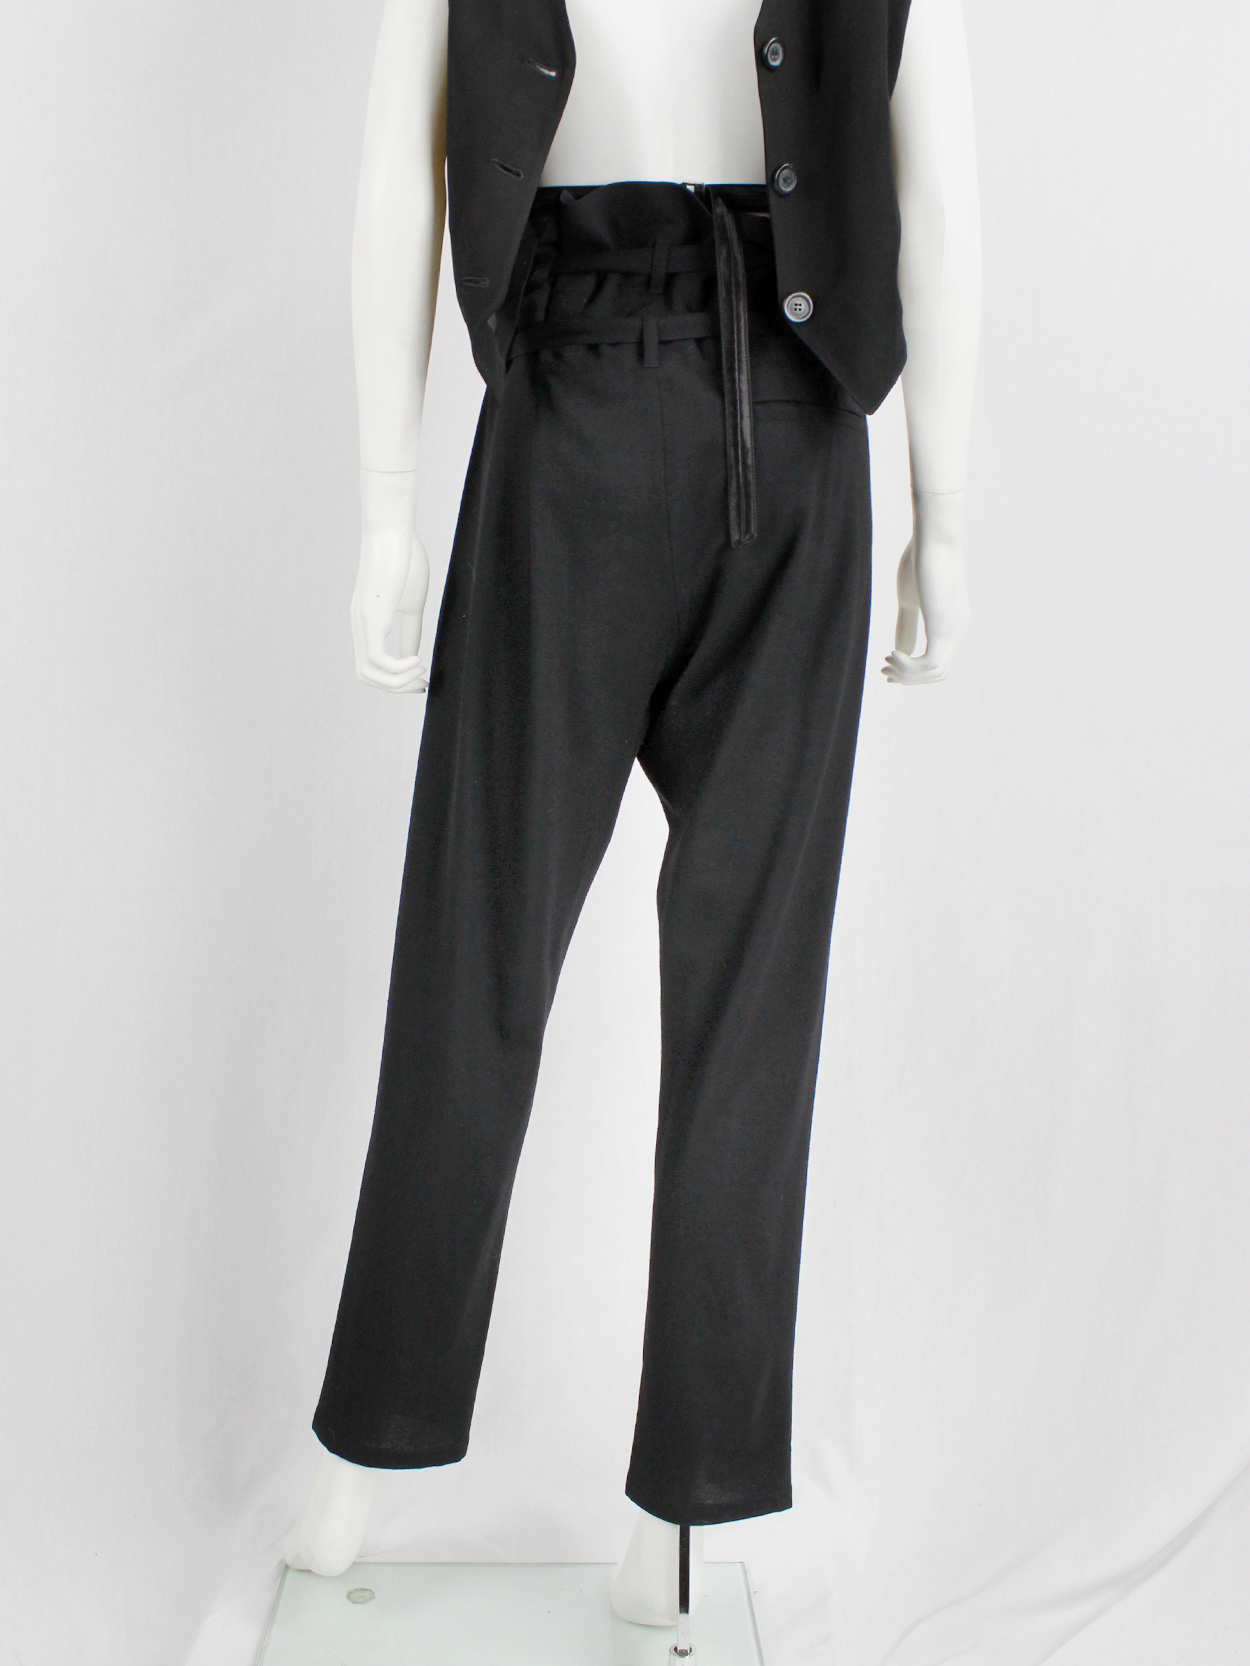 Ann Demeulemeester black harem trousers with 2 belt straps and 